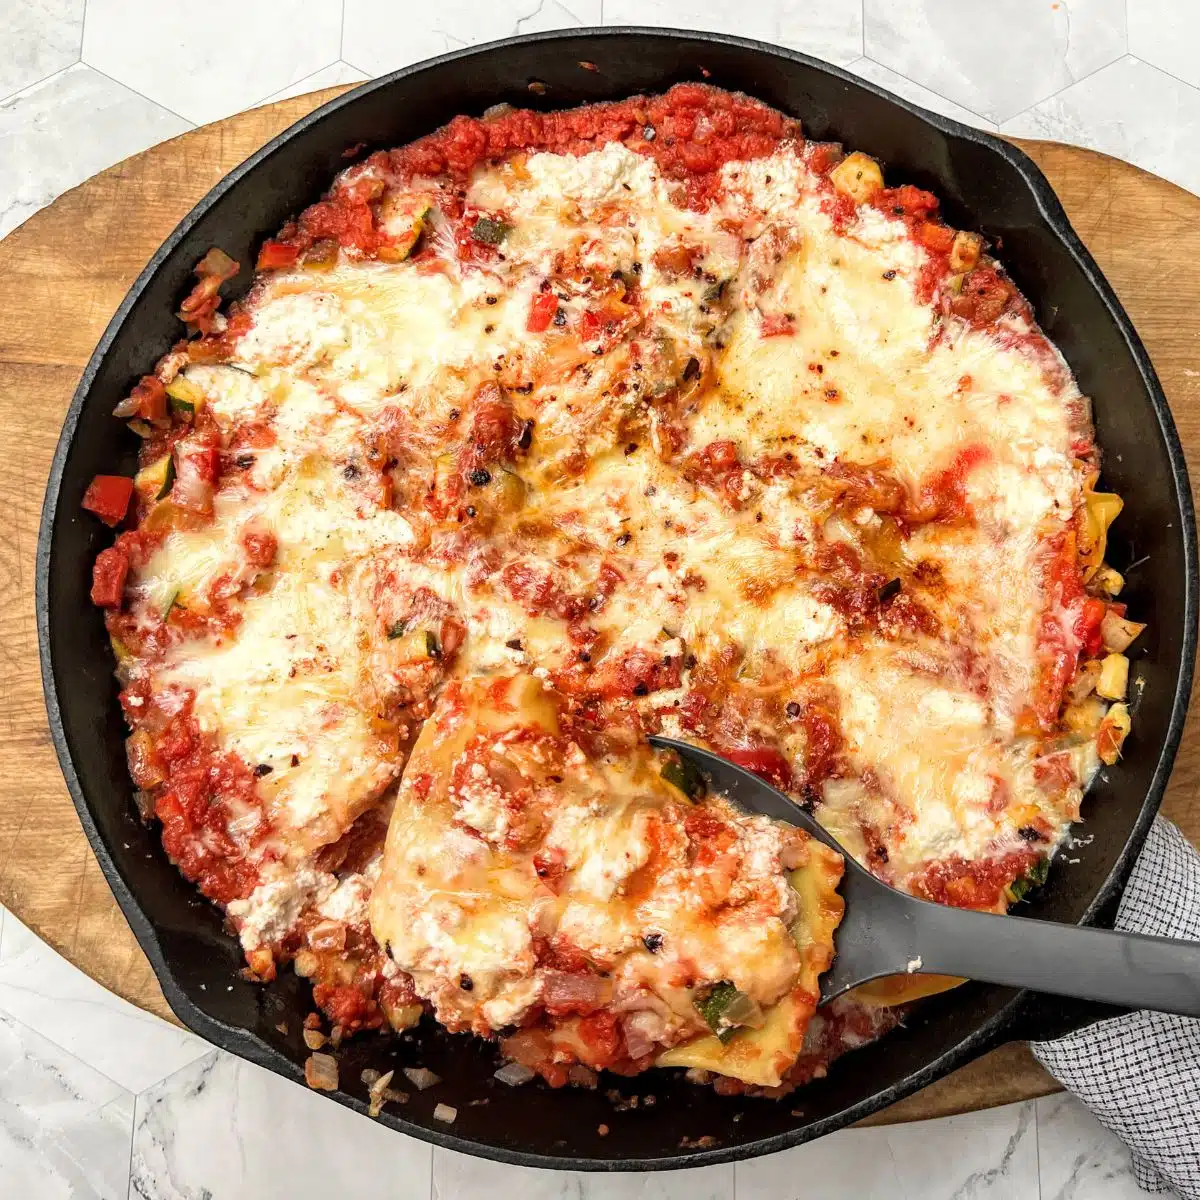 Cast iron pan with skillet vegetable lasagna.